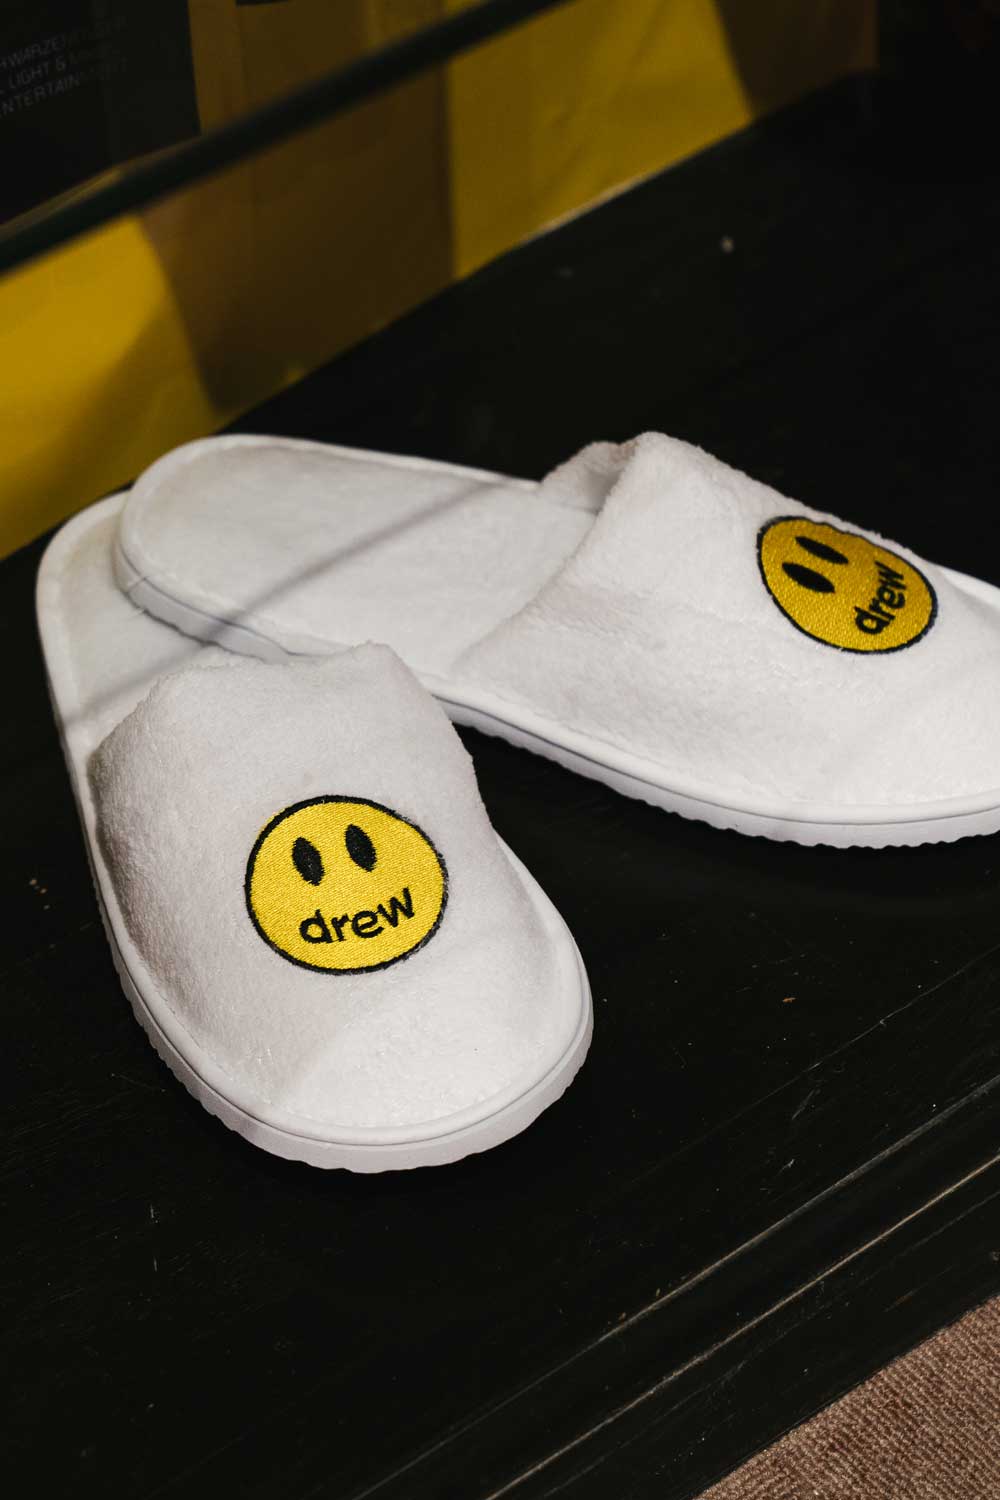 Justin Bieber's Cheap Ol' Regular Drewhouse Slippers Have